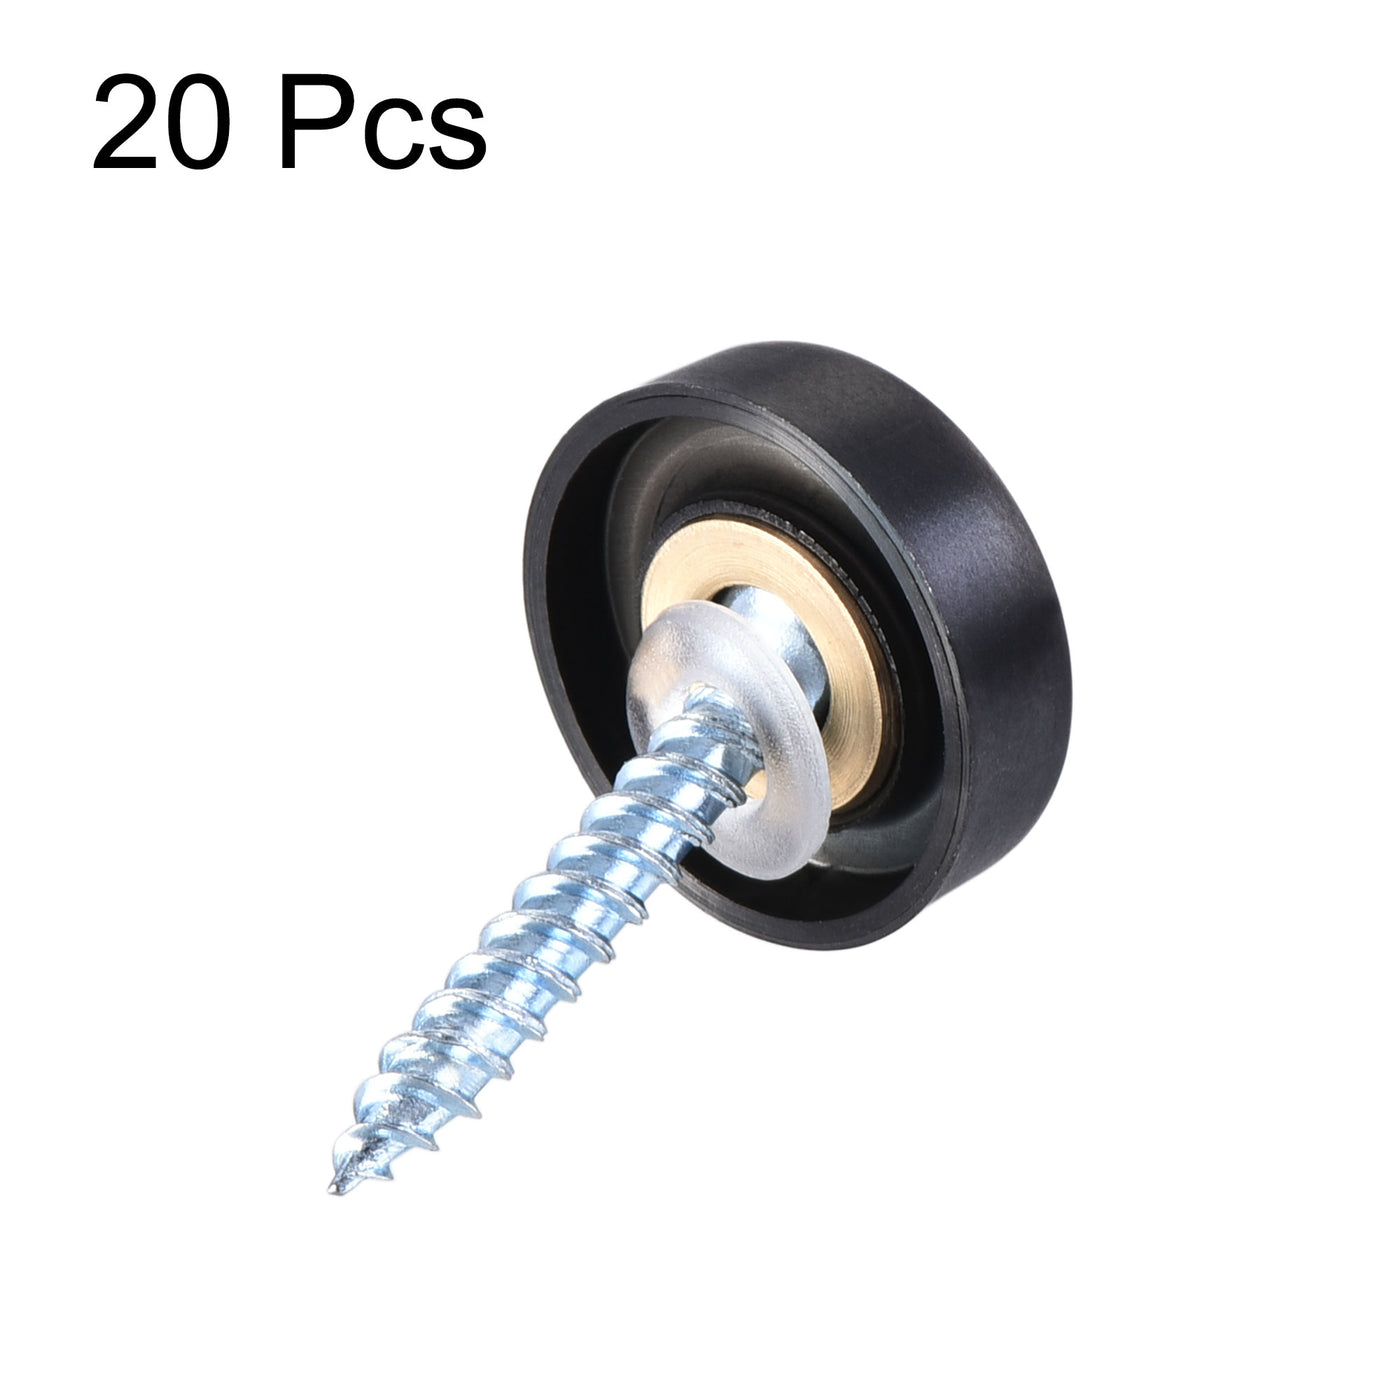 Uxcell Uxcell Mirror Screws, 25mm/0.98", 20pcs Decorative Cap Fasteners Cover Nails, Wire Drawing, Black 304 Stainless Steel